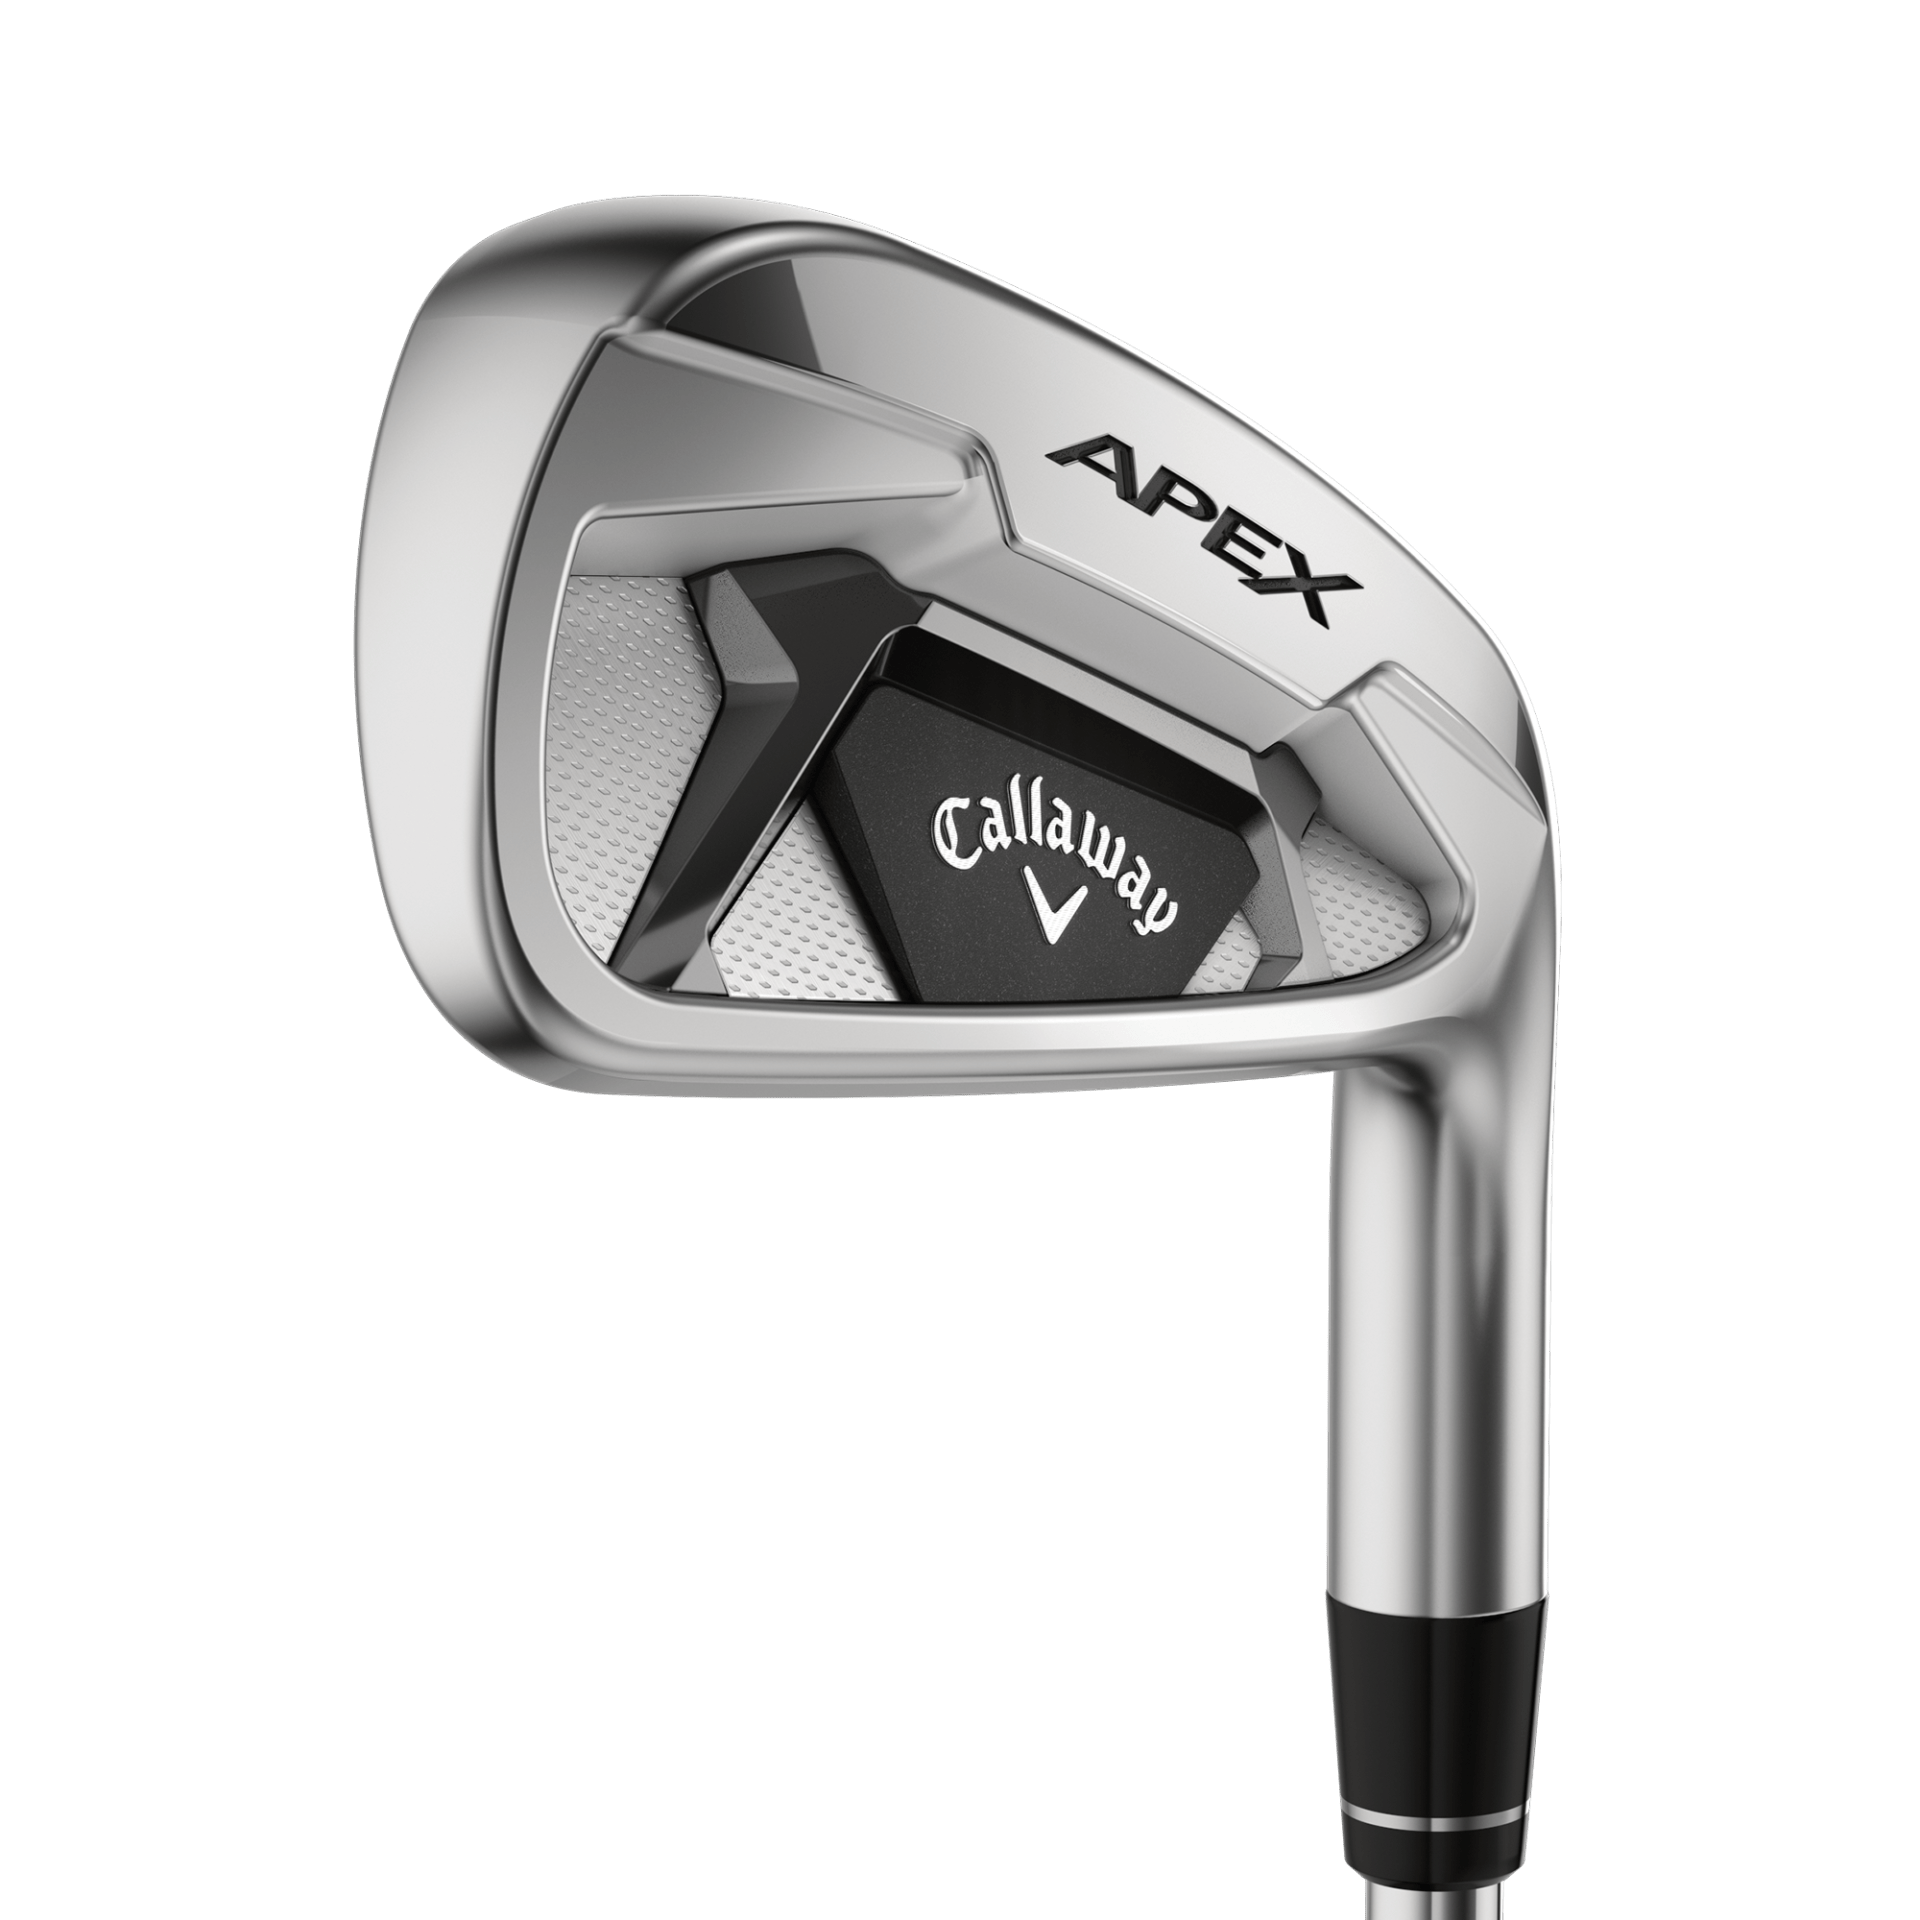 Used Callaway Driving Irons